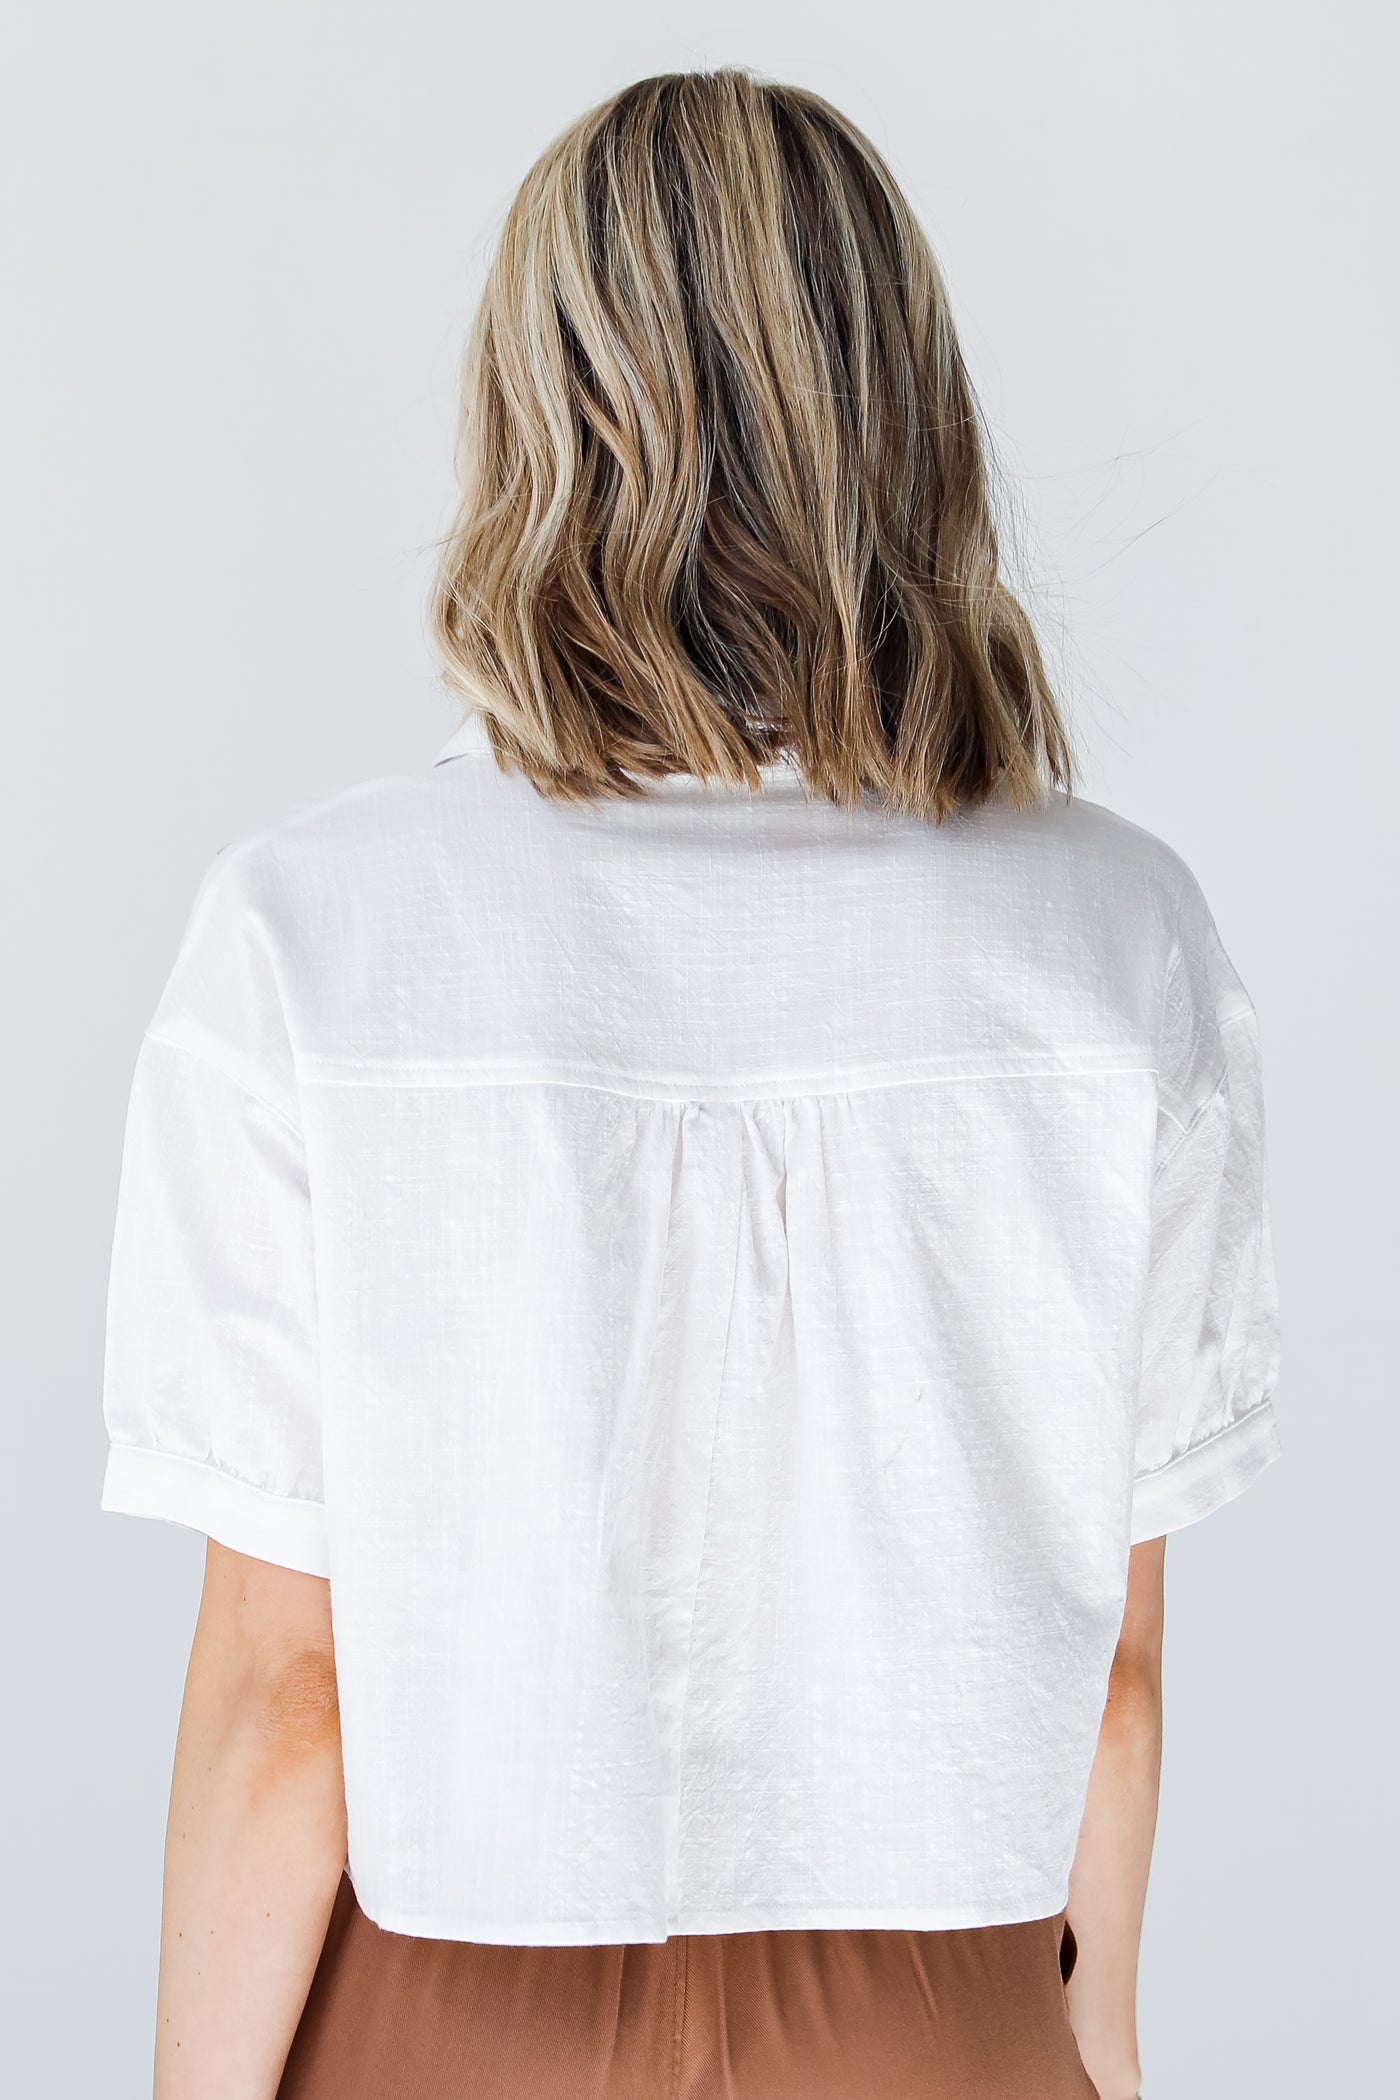 white Cropped Button-Up Blouse back view